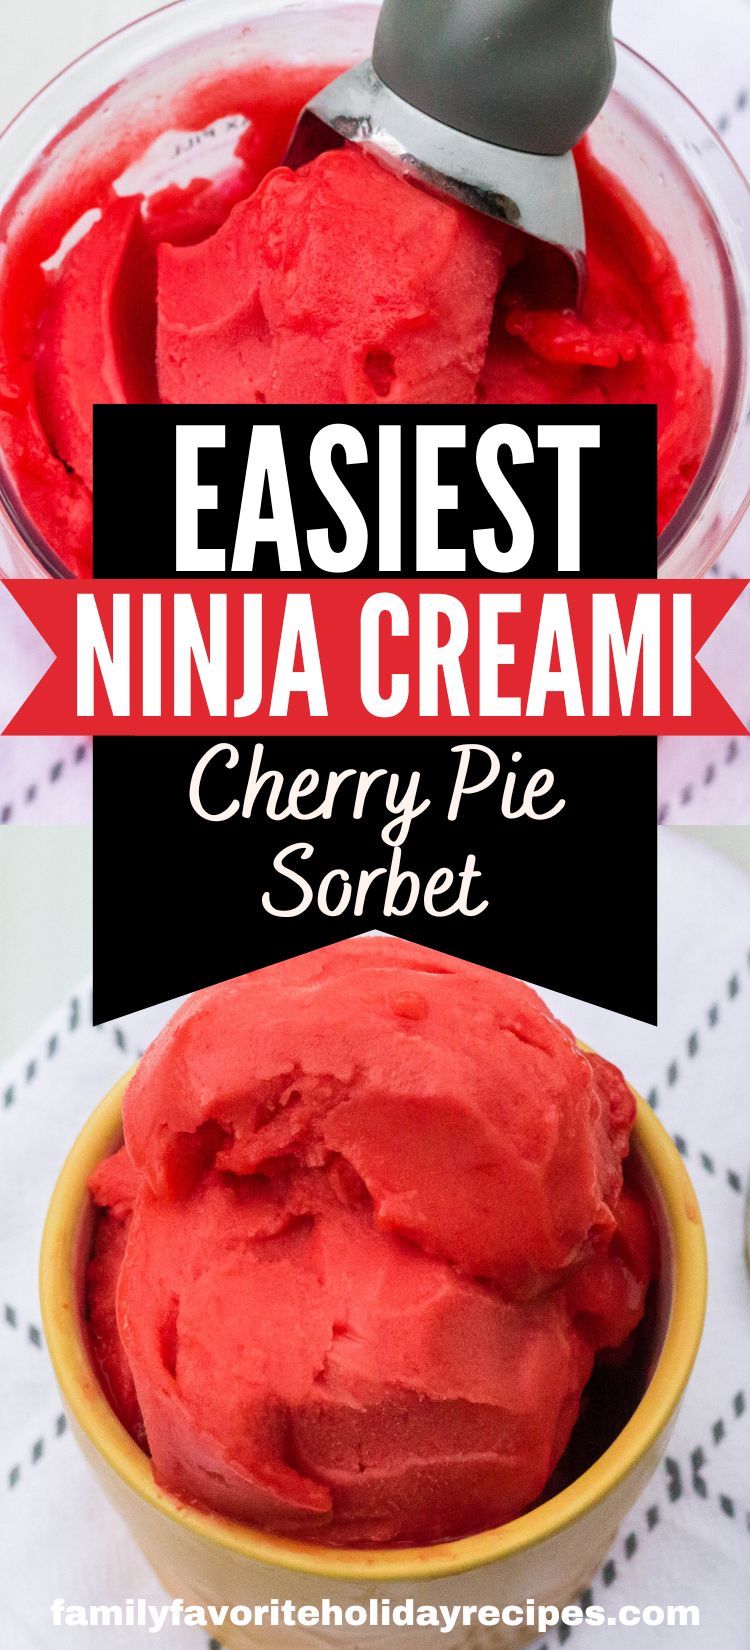 two photos showing Ninja Creami cherry pie sorbet from different angles